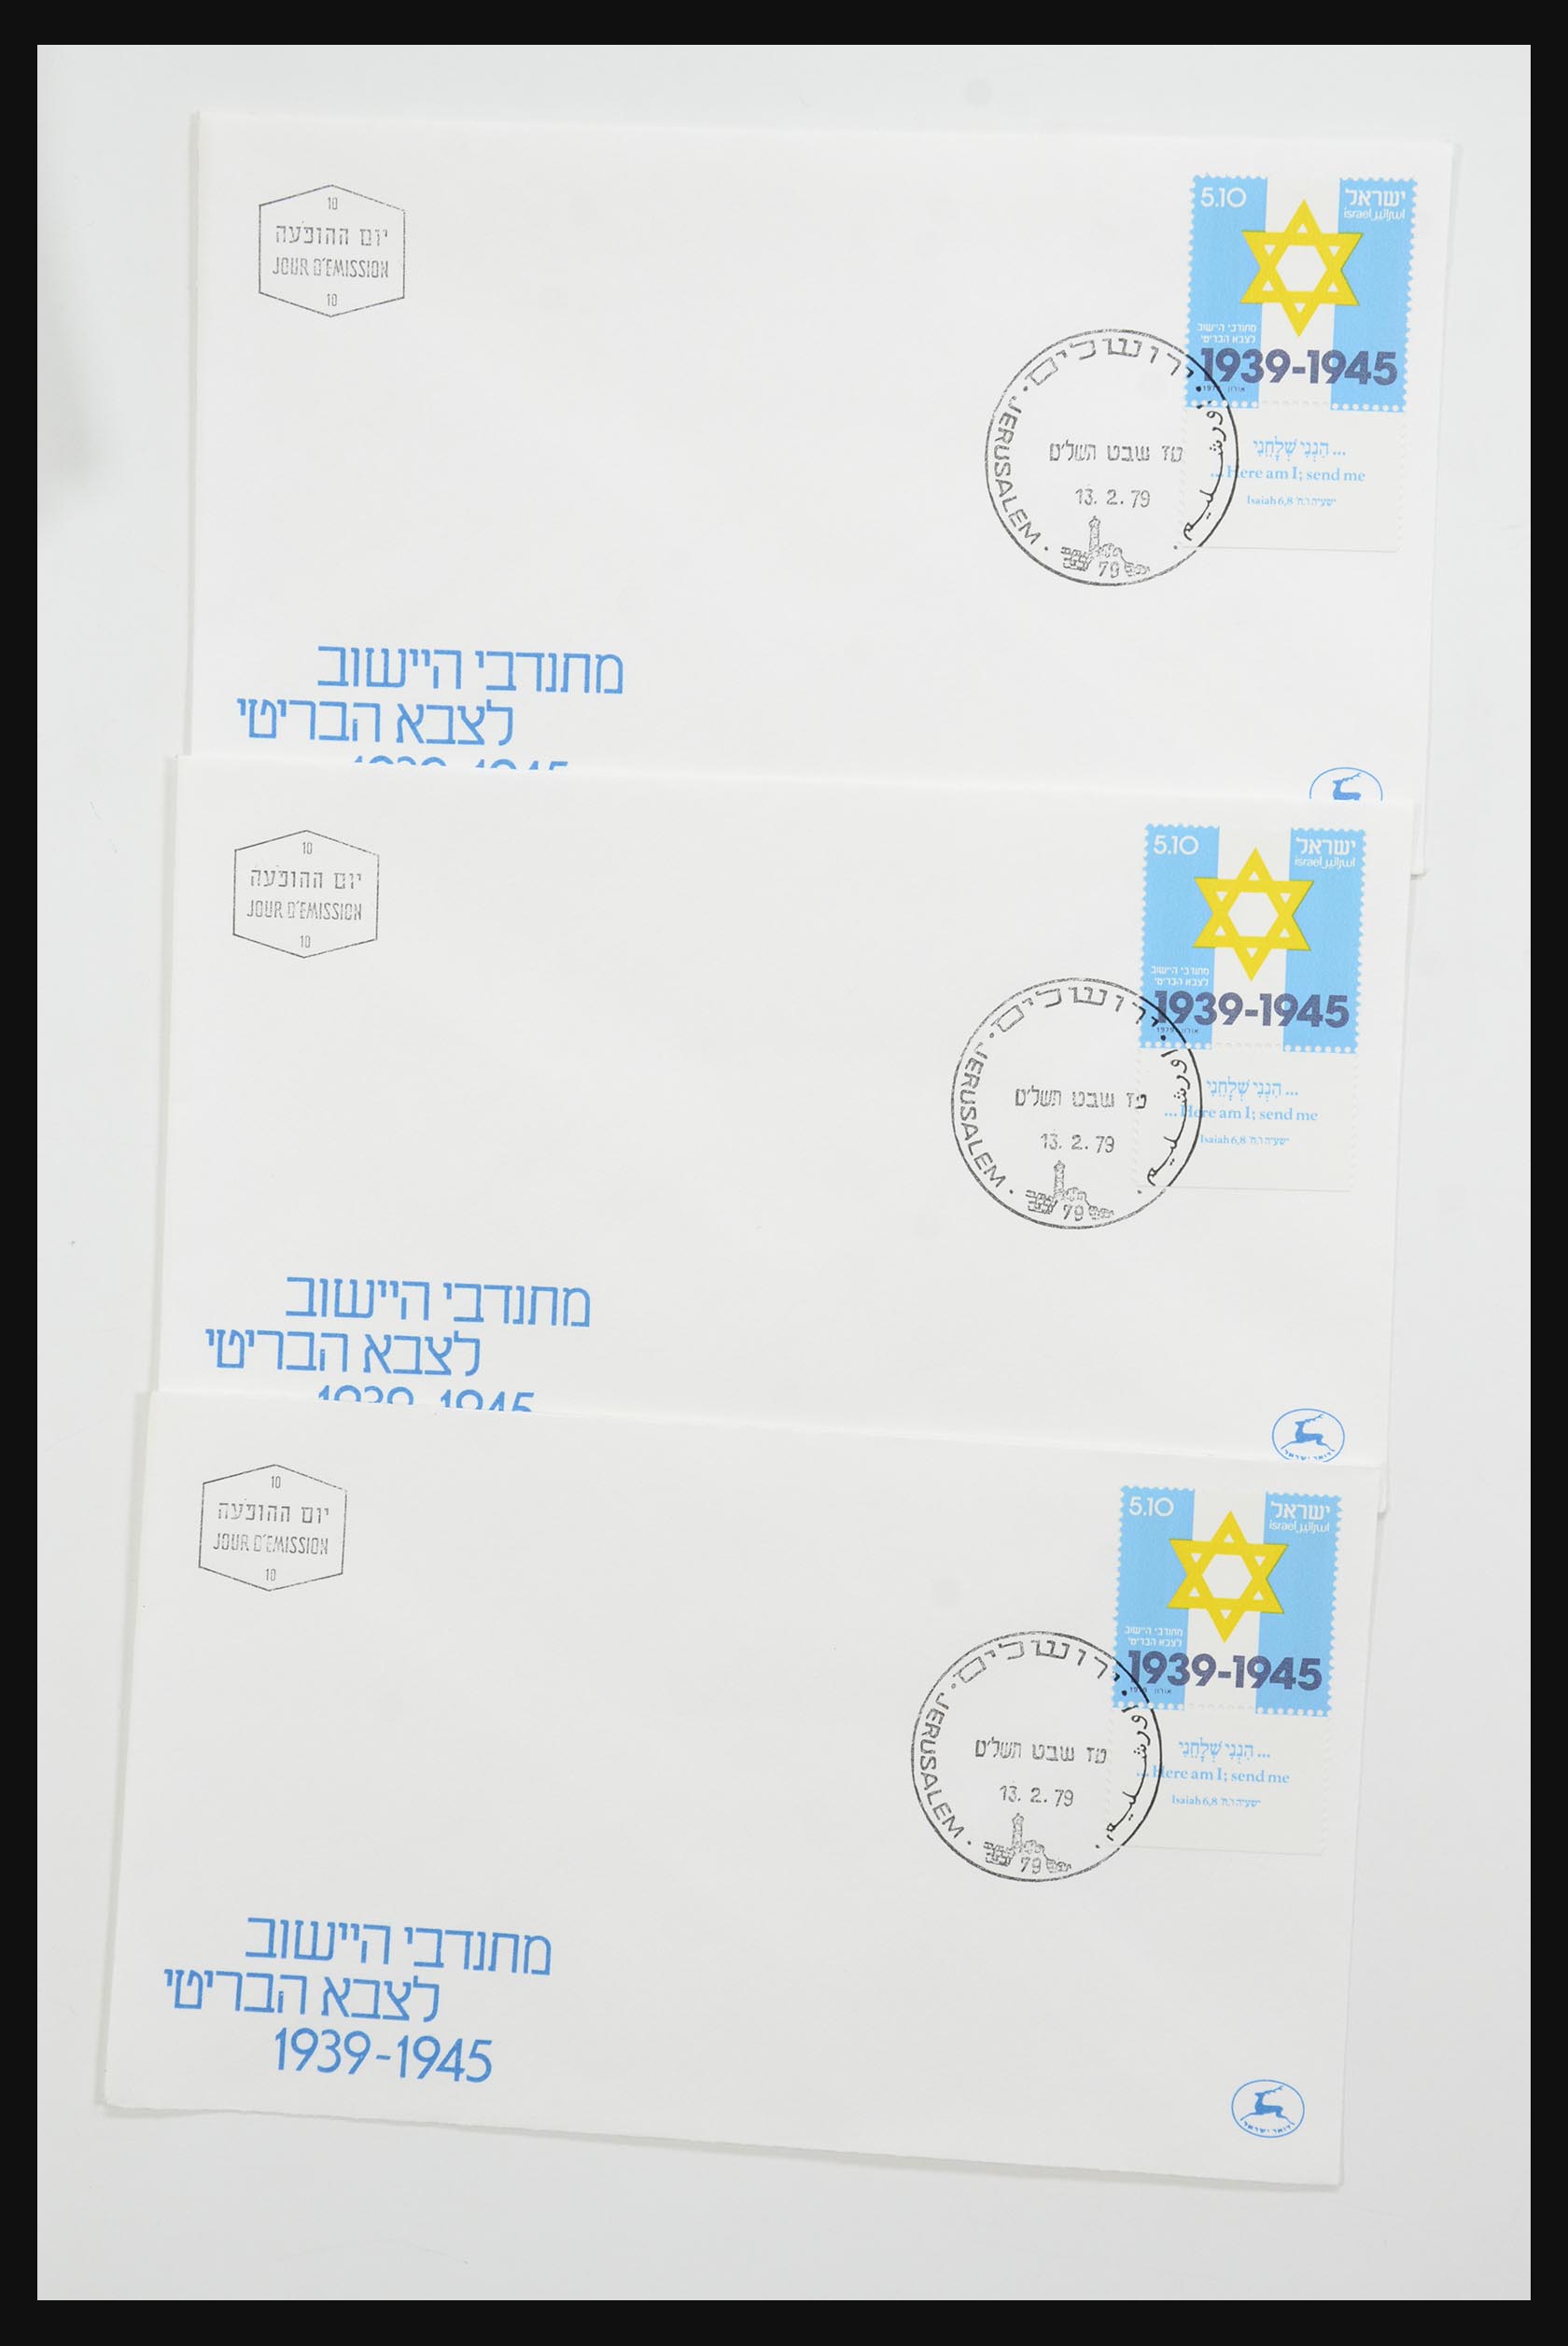 31924 560 - 31924 Israel first day cover collection 1957-2003.